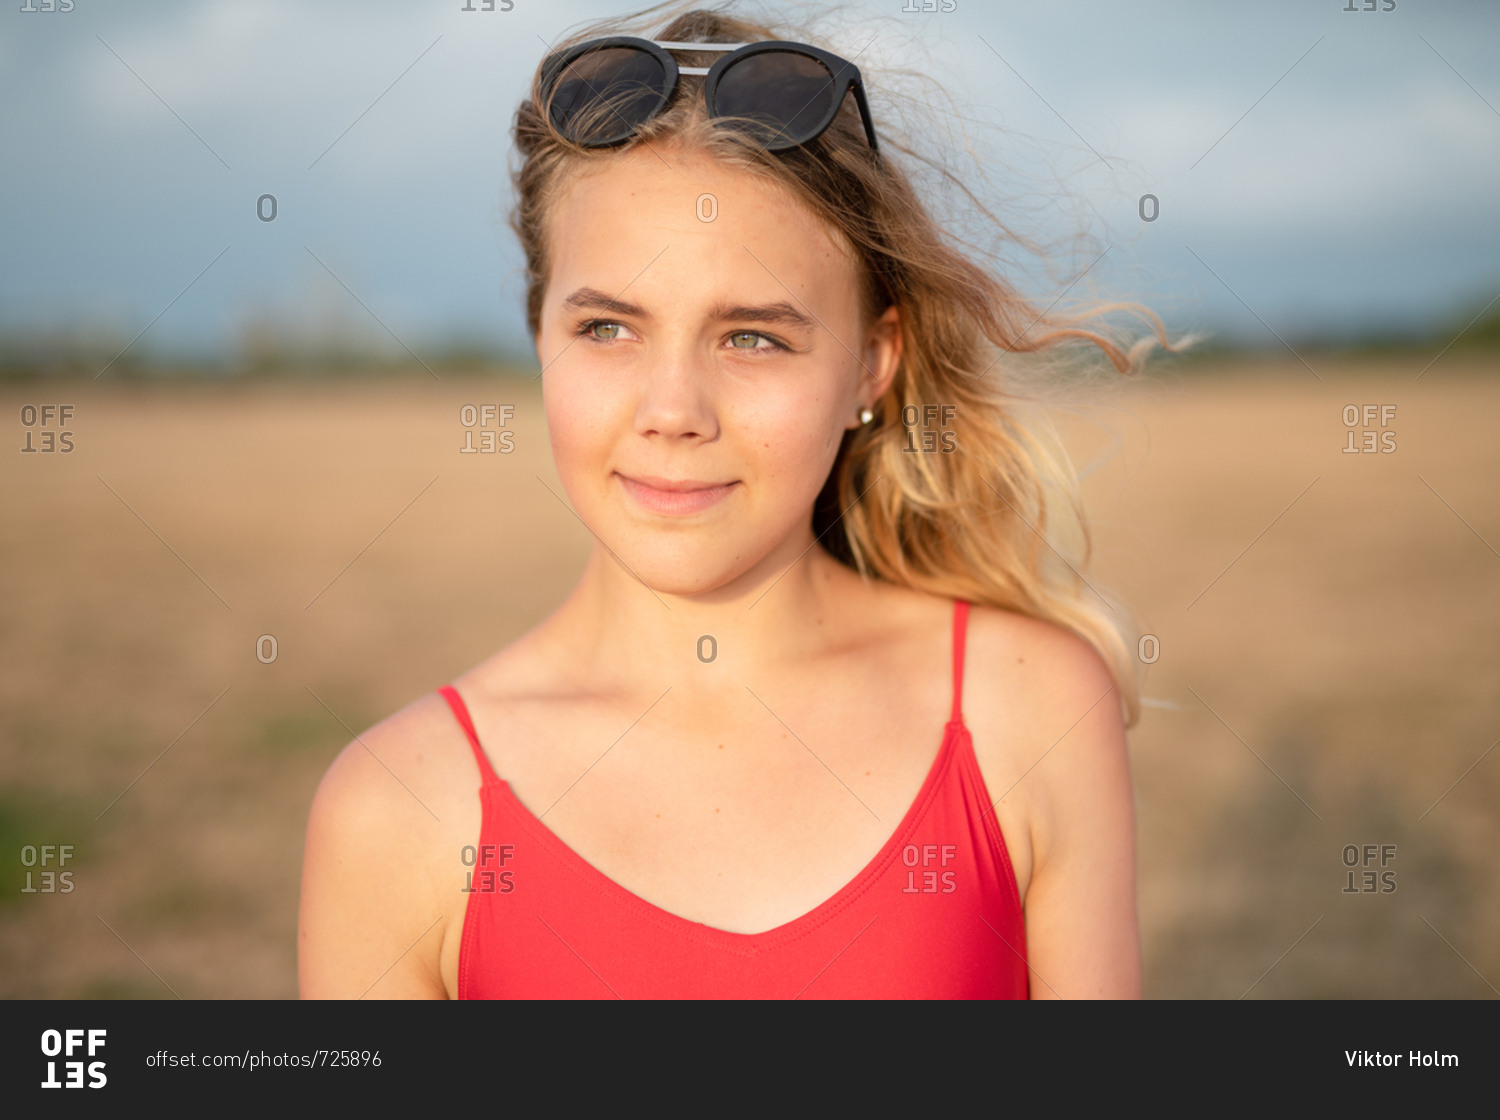 Lexica - Young blonde woman with square sunglasses wearing an open